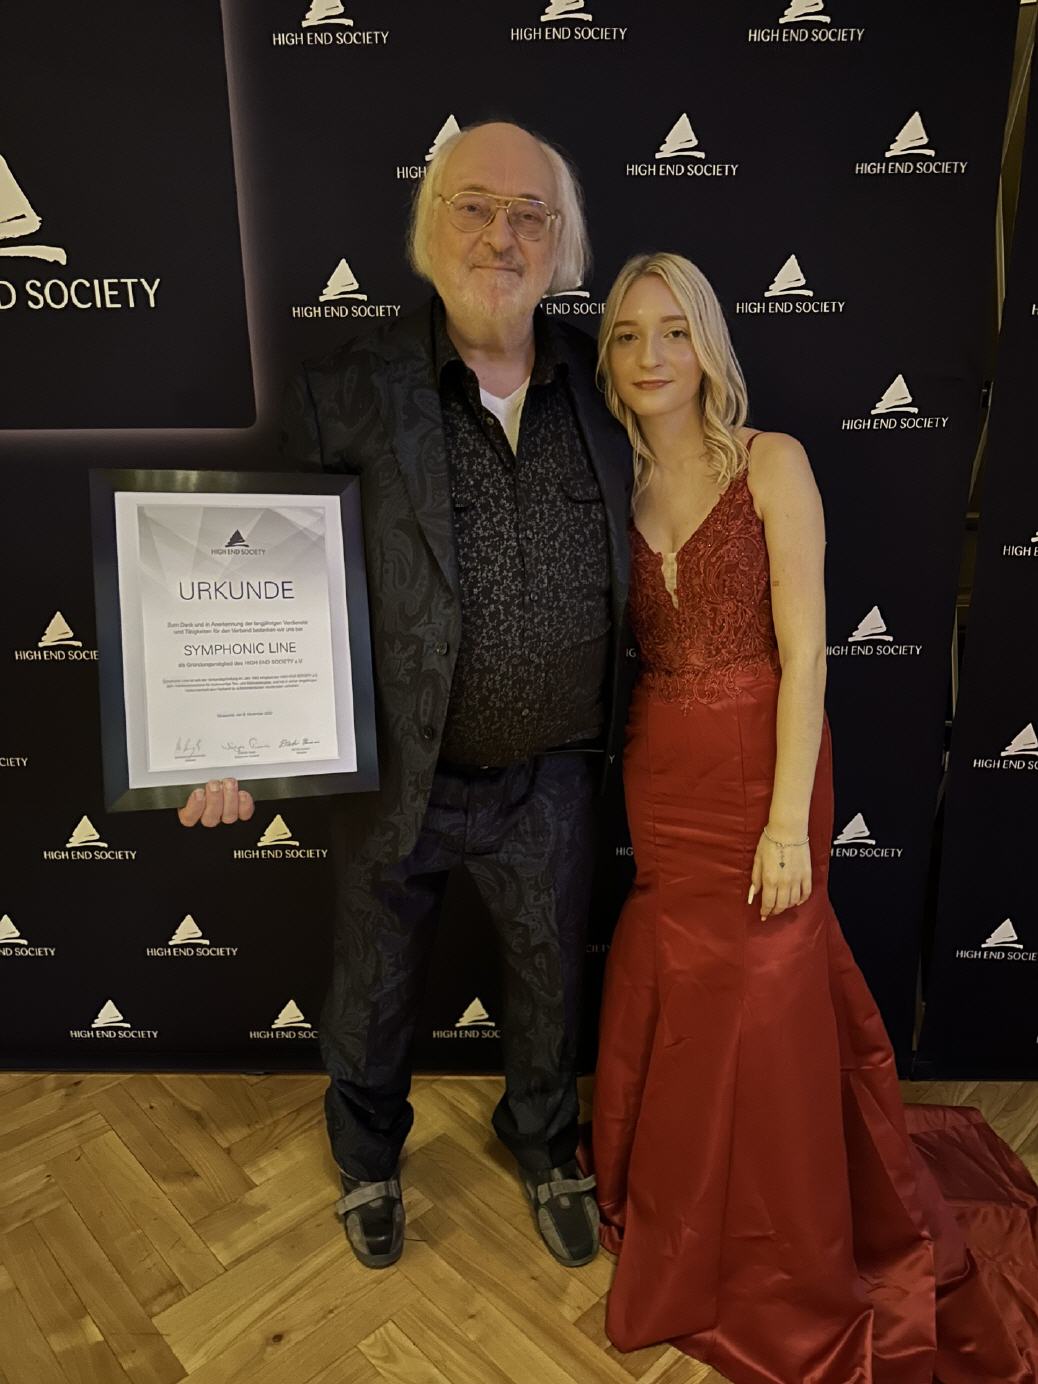 Cofounder Rolf Gemein- with daughter - honoured